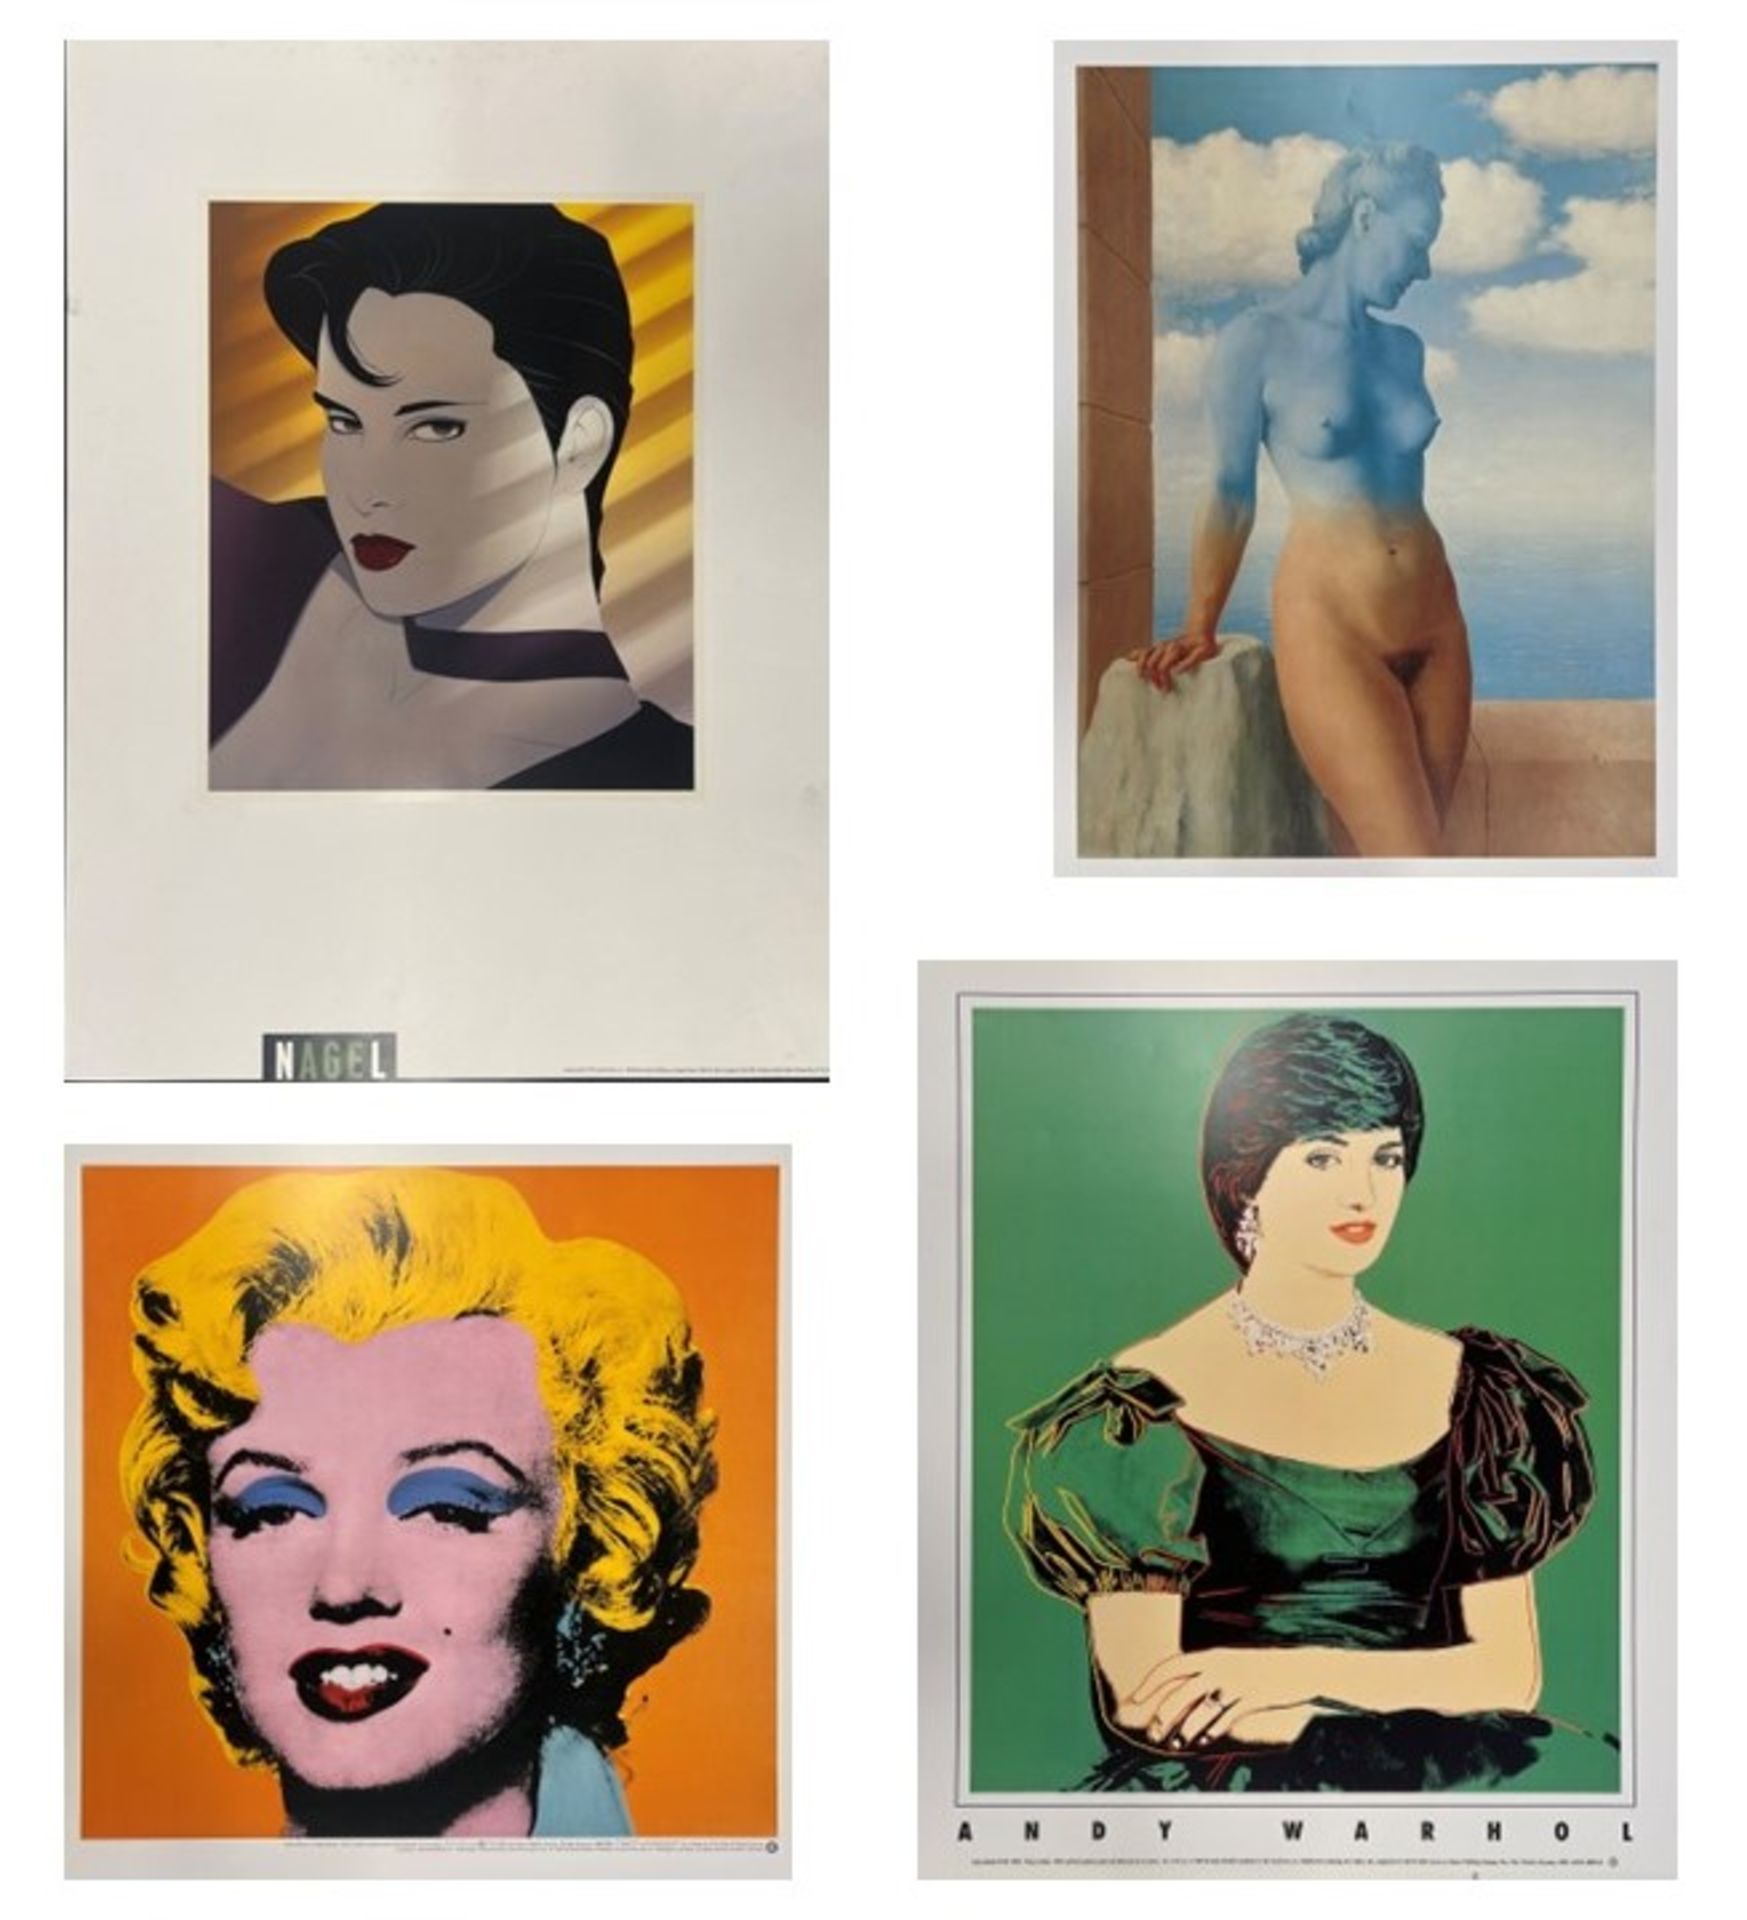 FOUR ASSORTED VINTAGE POSTERS - ANDY WARHOL/MAGRITTE/NAGEL